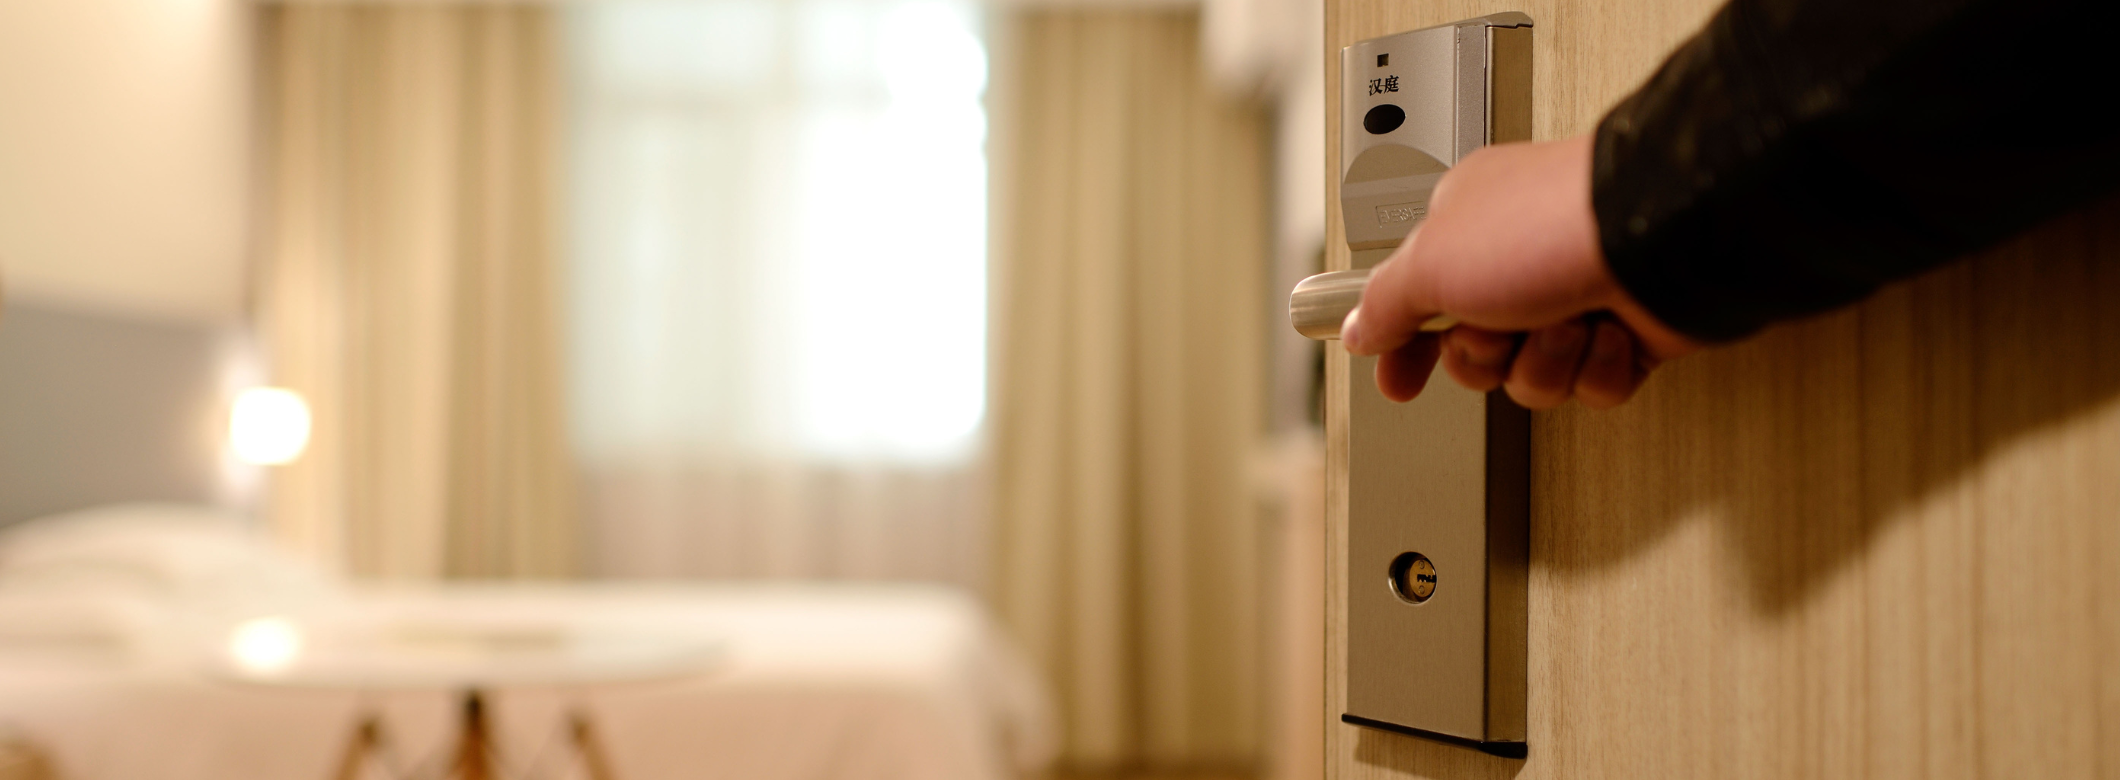 Cloud Key technology for hotels